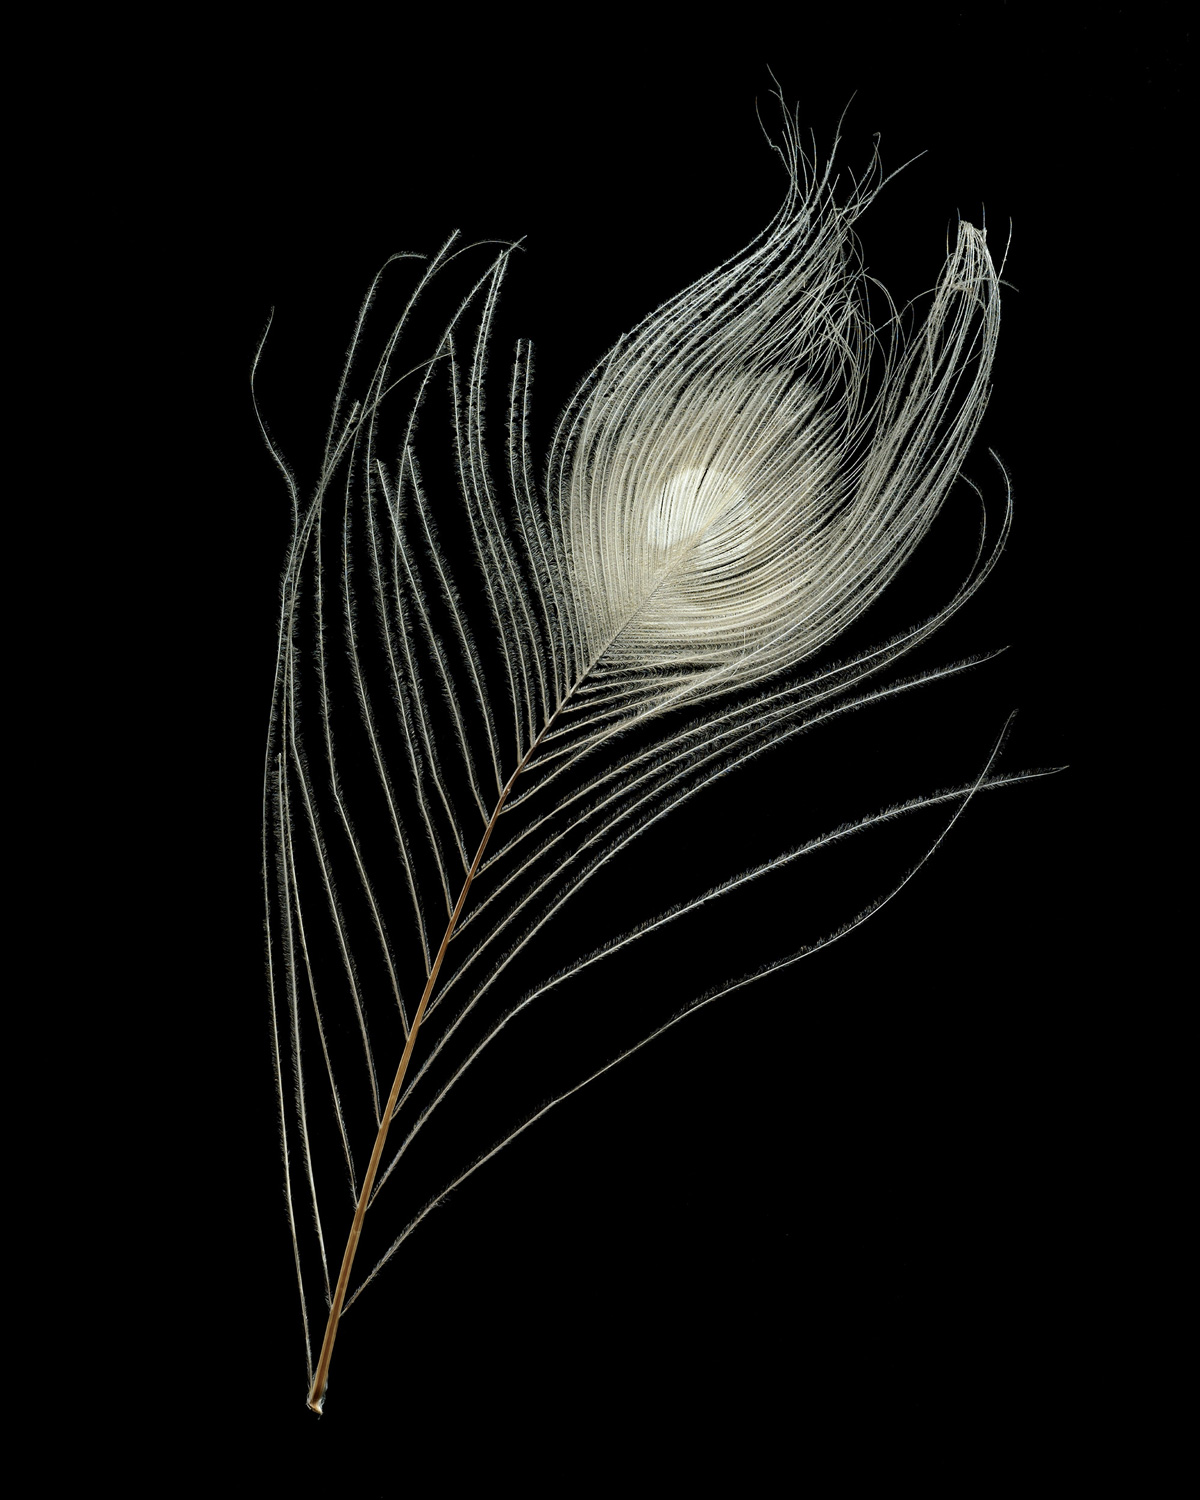 A photograph of a bleached peacock feather.